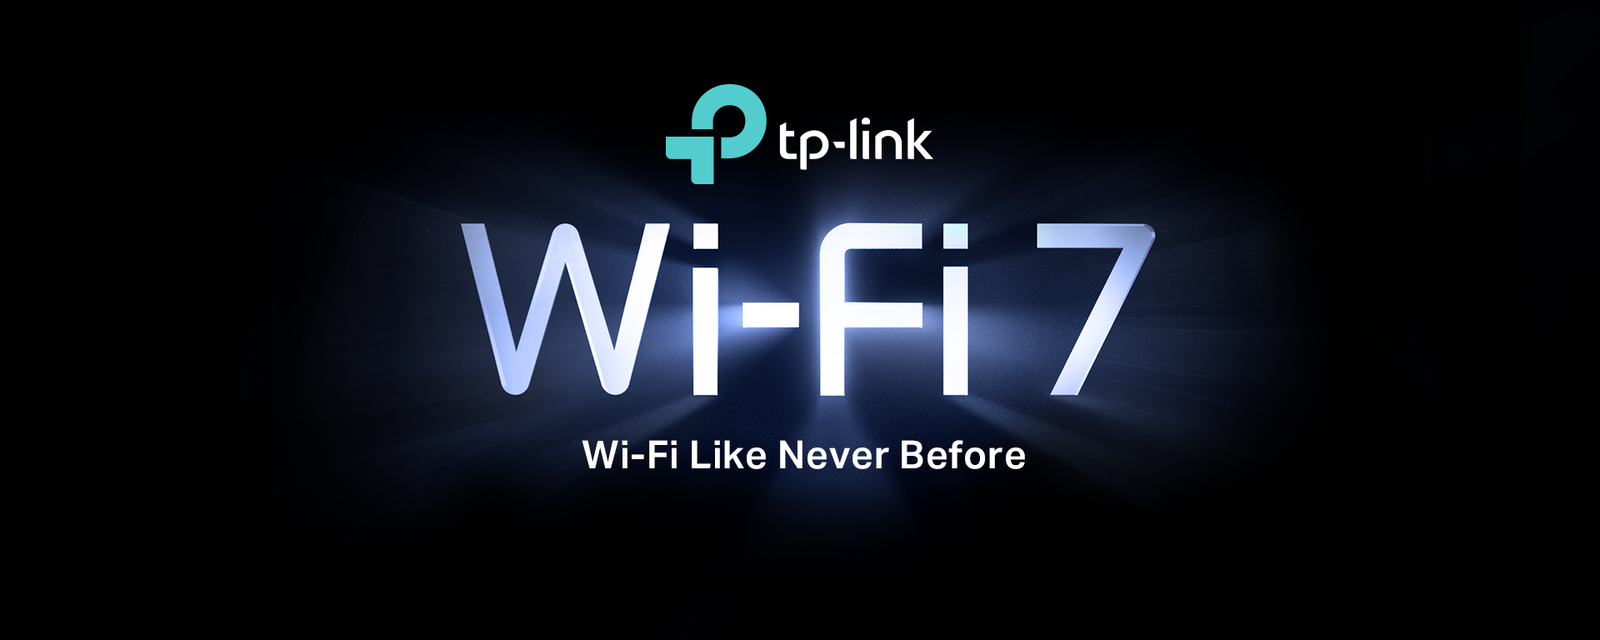 Towards a Faster Future with WiFi 7 TP Link to Release Wi Fi 7 Products in April